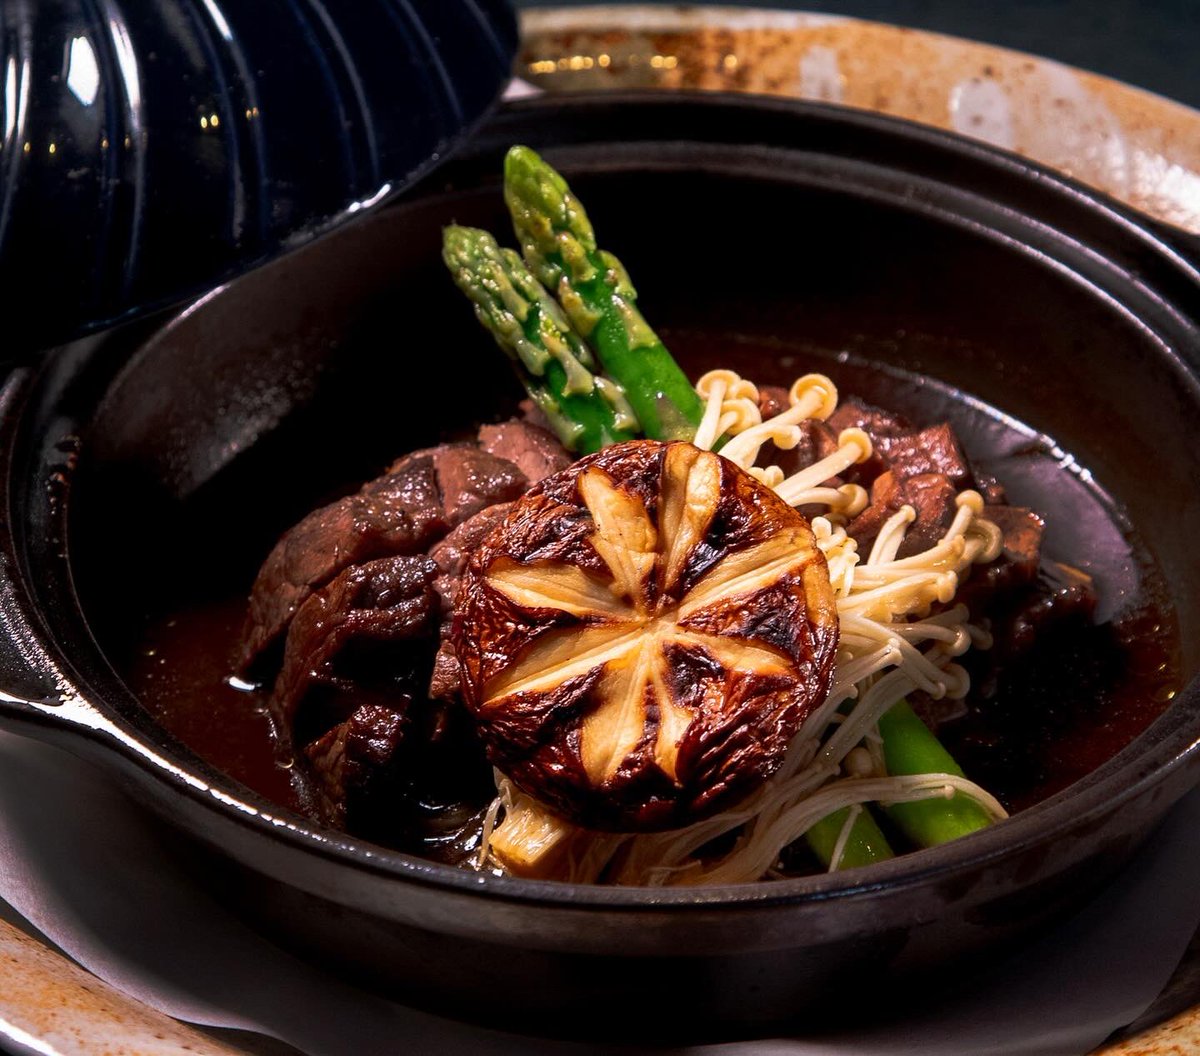 Nobu's Beef Toban Yaki - marinated beef seared to perfection on a hot cast-iron plate. Served with seasonal vegetables and a soy-based sauce for the perfect balance of sweetness and umami flavors. Come to Nobu and warm up with this delicious dish!